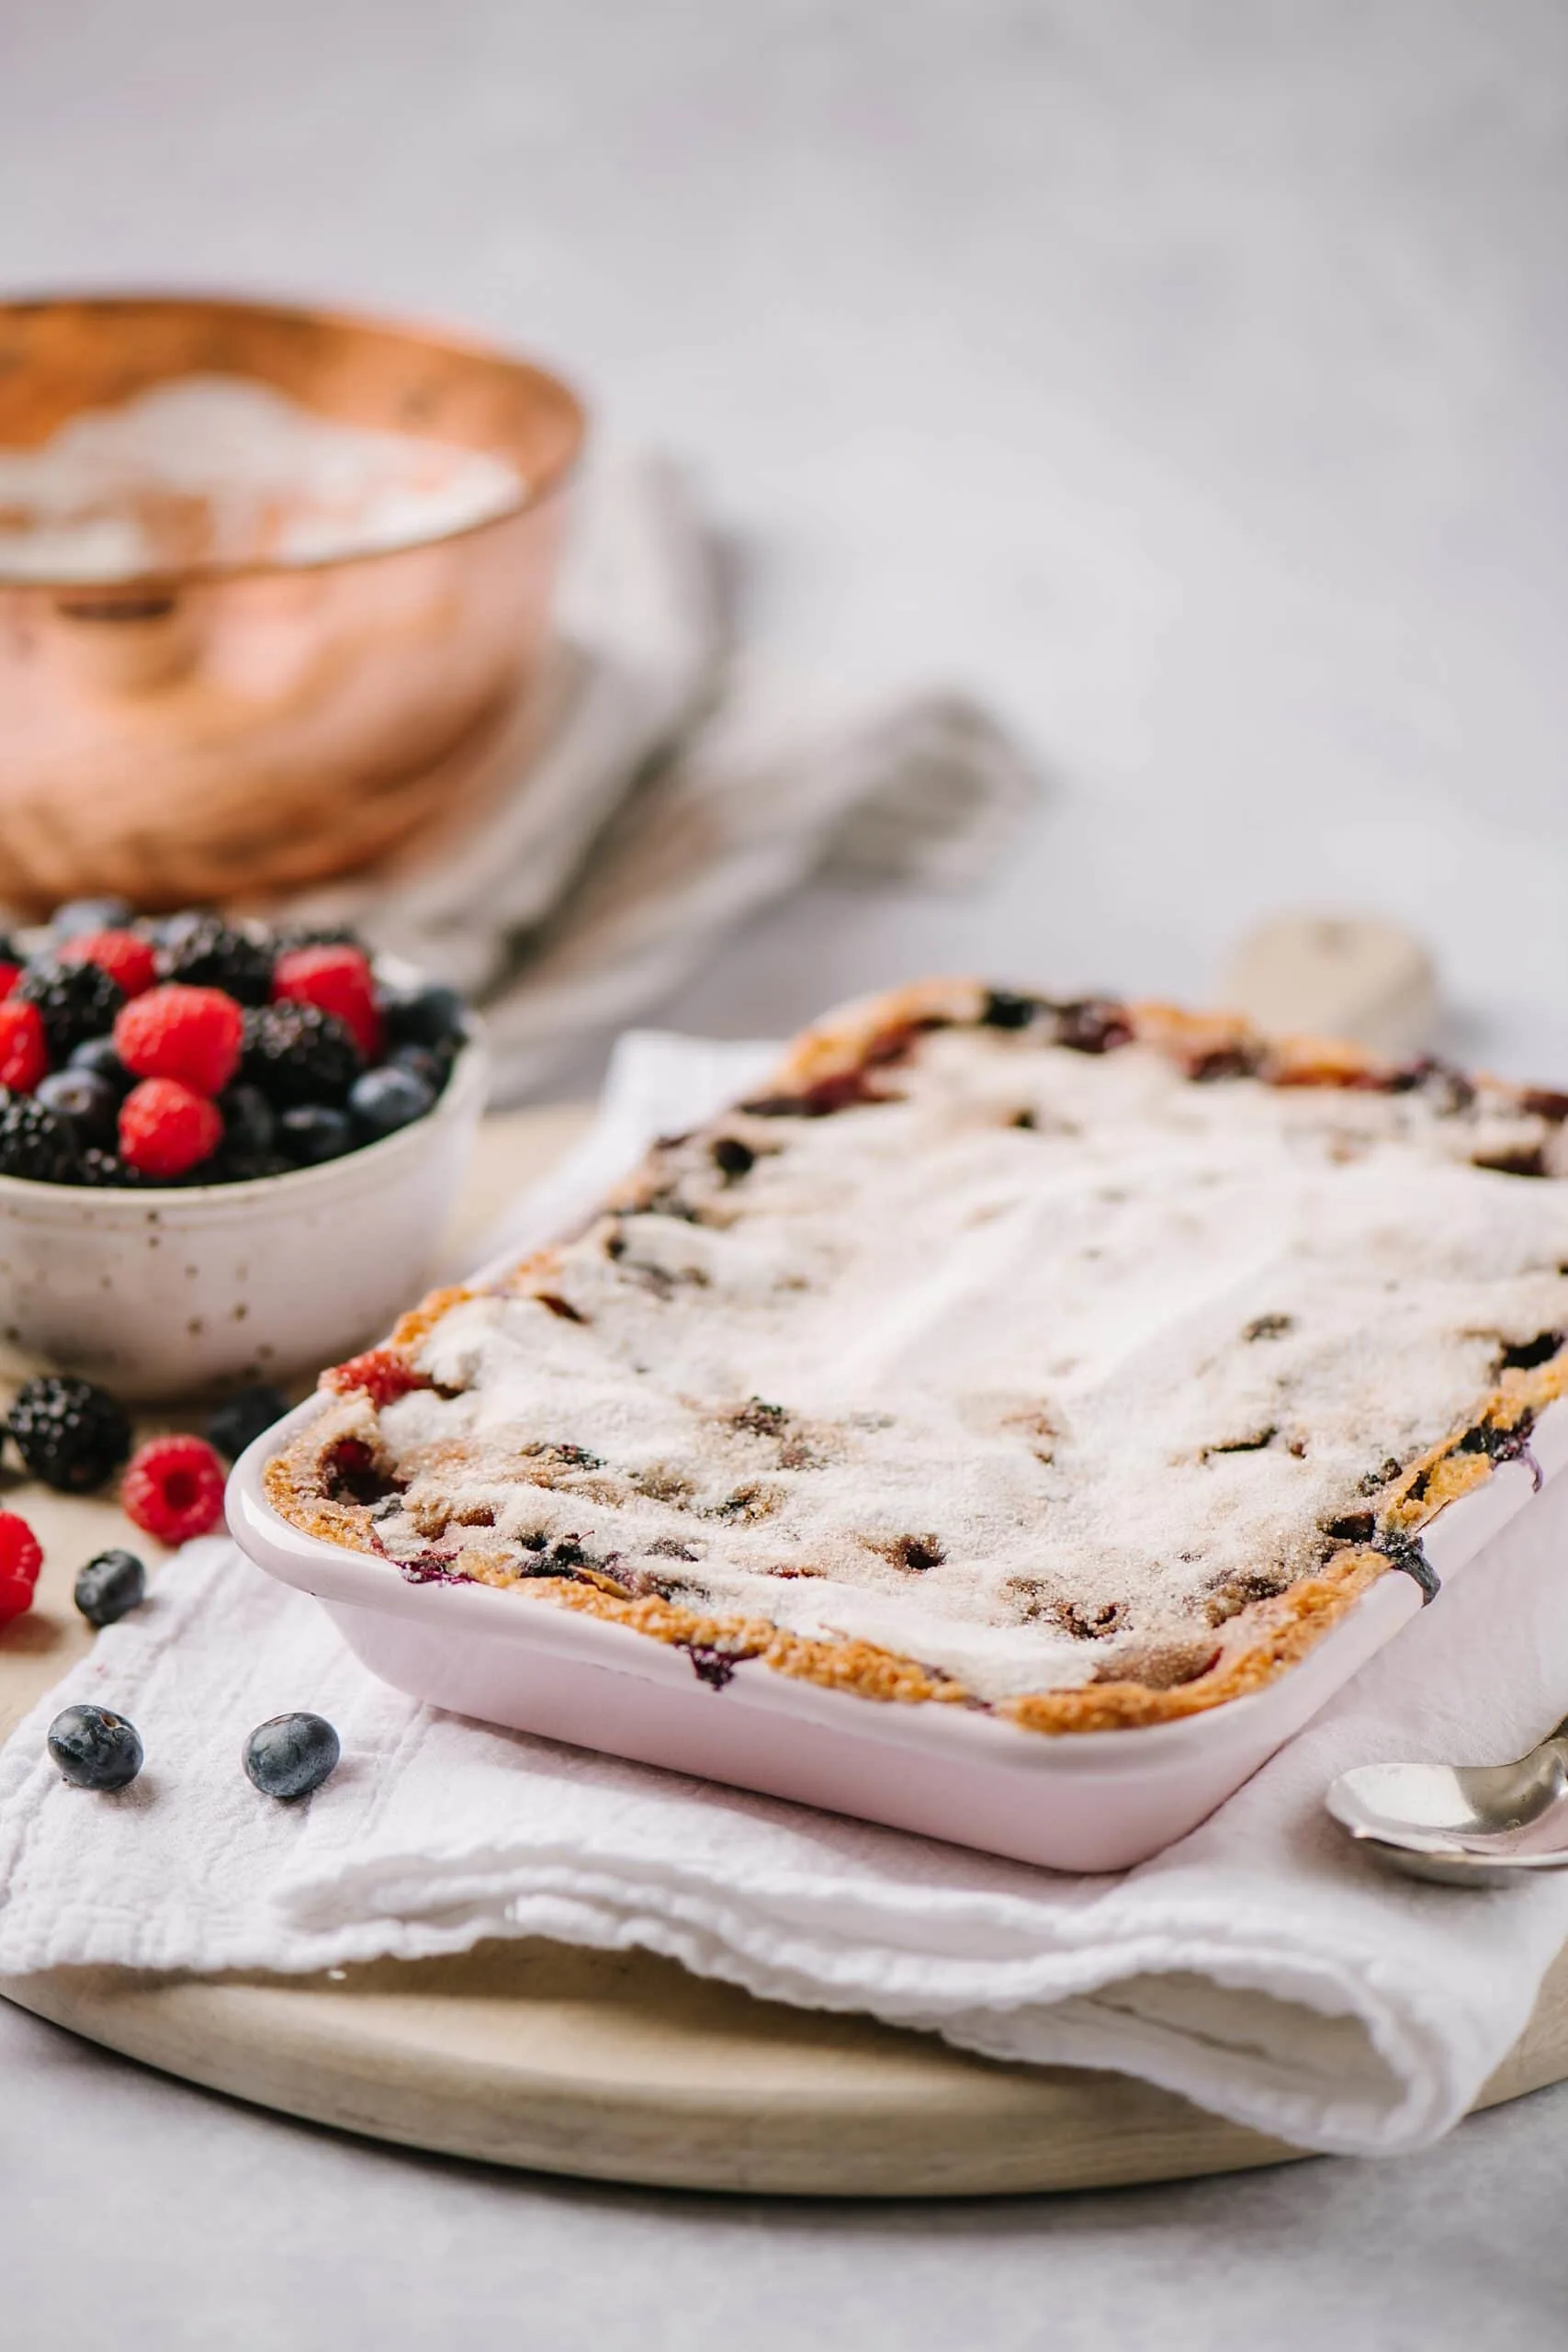 baked Berry Cobbler with Cinnamon Crunch Topping